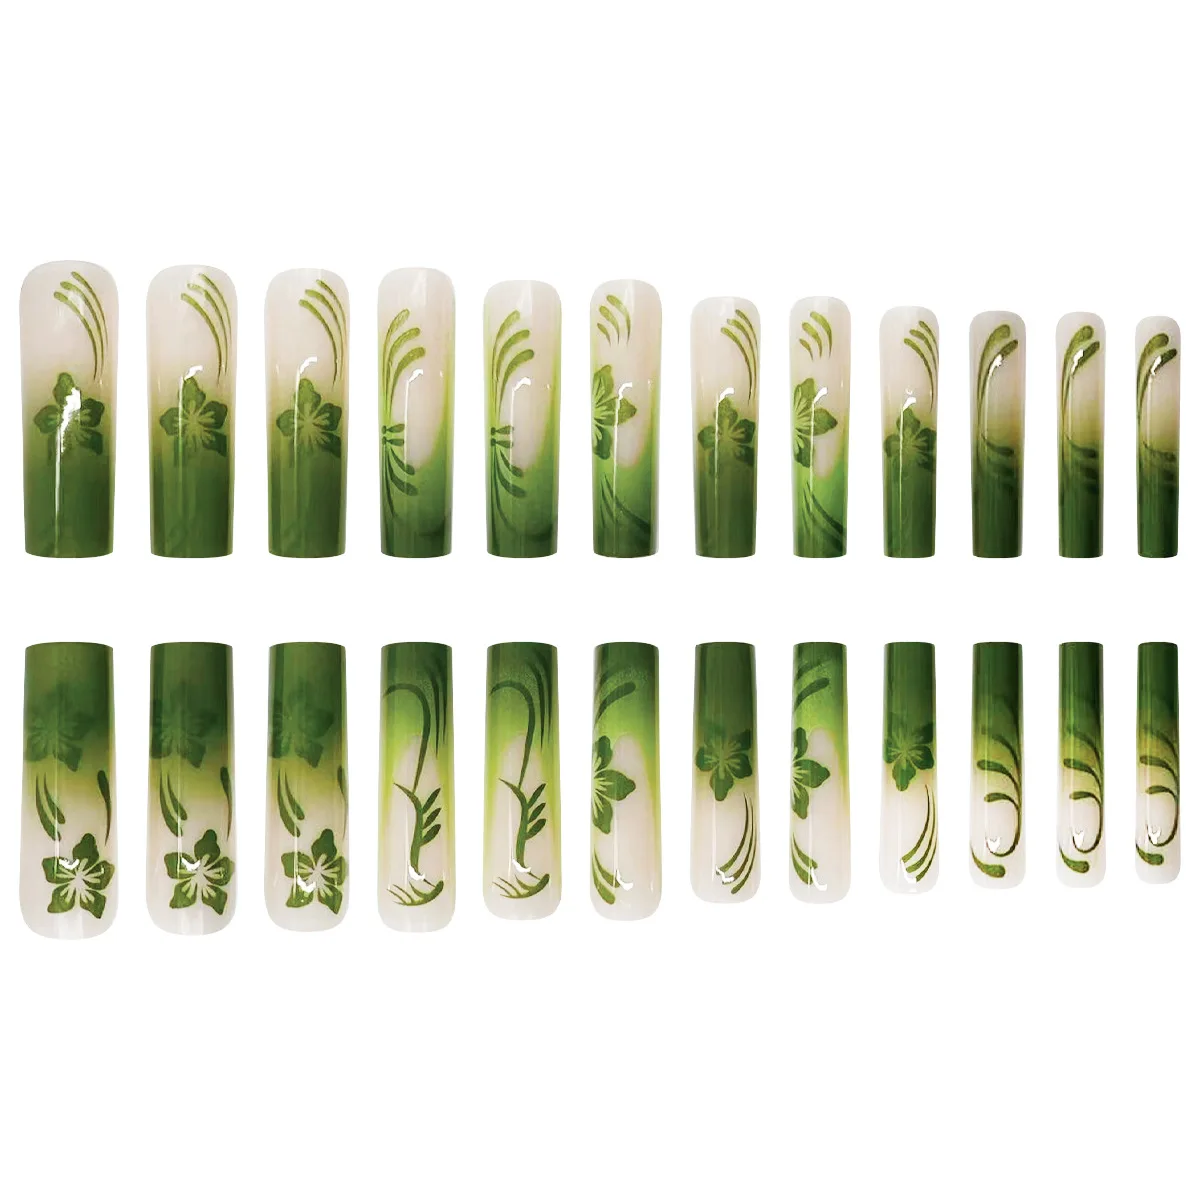 24pcs Long Ballet Press on Nails Gradient Green Spring Flower Pattern False Nails Patches Japanese Style Wearable Fake Nails